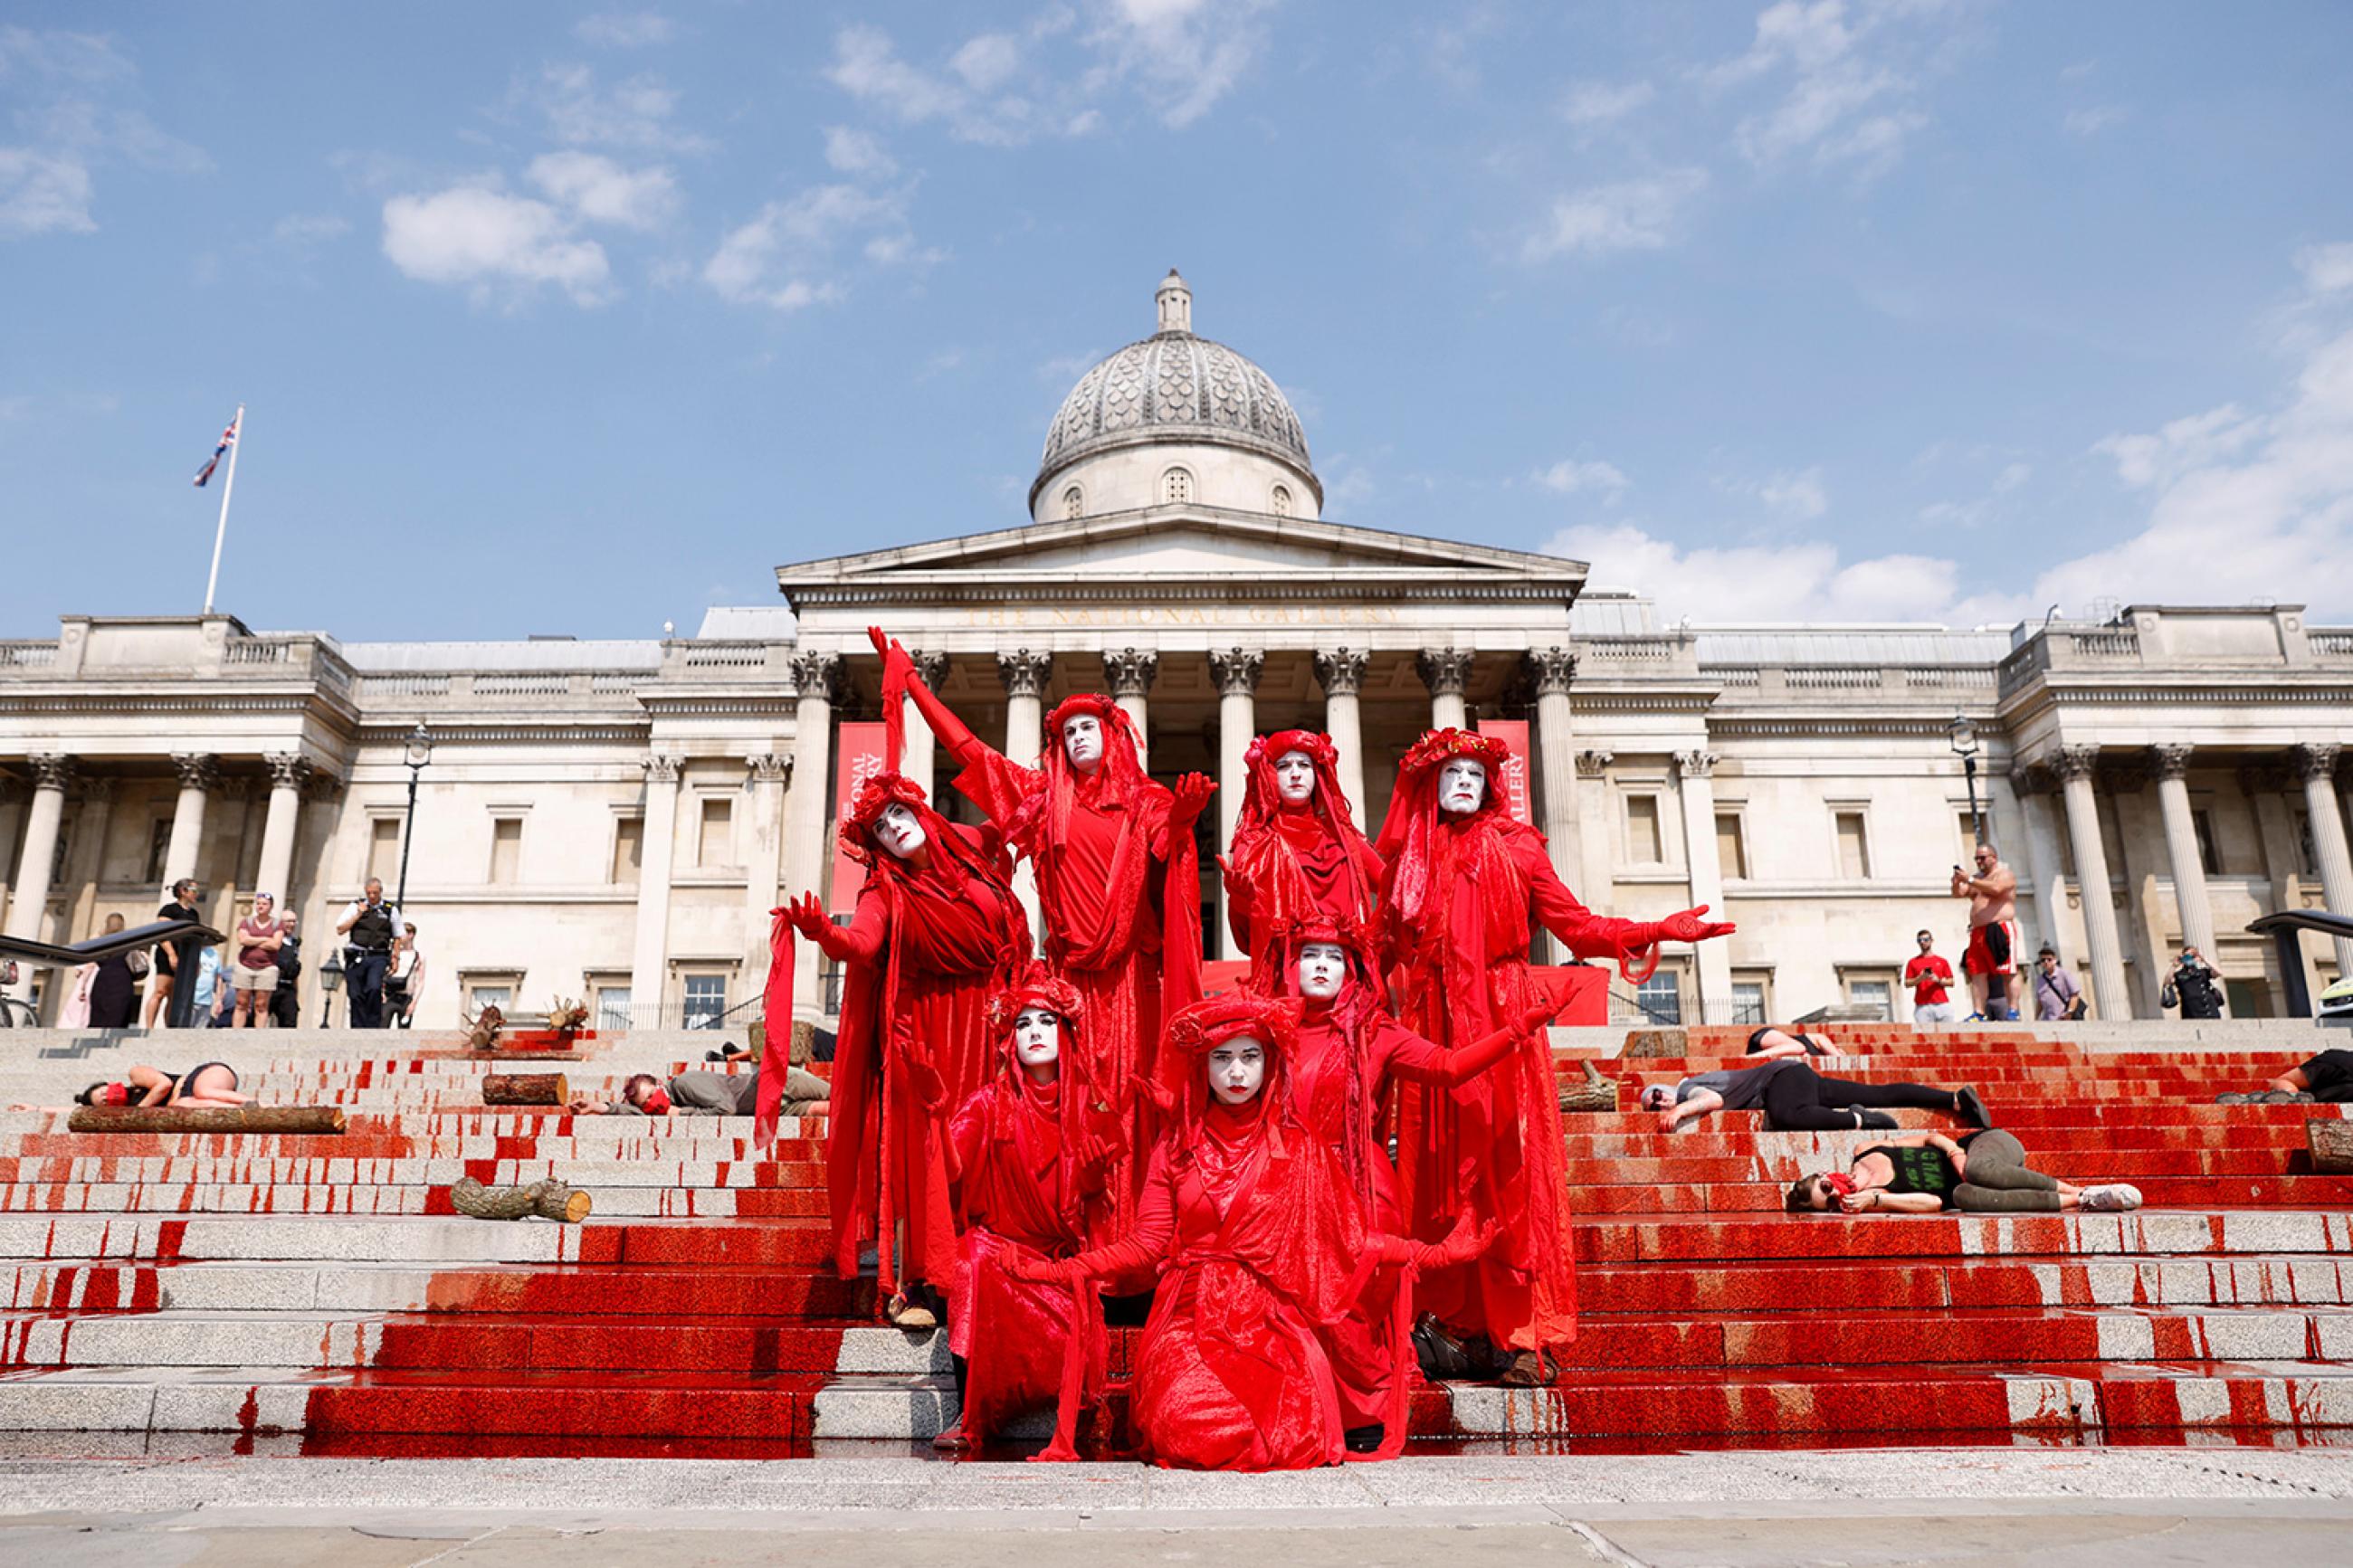 COVID-19 has seen its share of protest and political theater—like one in London on August 9, 2020, to call attention to Brazil, a country also subject to conspiracy theories over the virus' origins. The photo shows a crowd of performance artists demonstrating with costumes and fake blood splashed everywhere. REUTERS/John Sibley